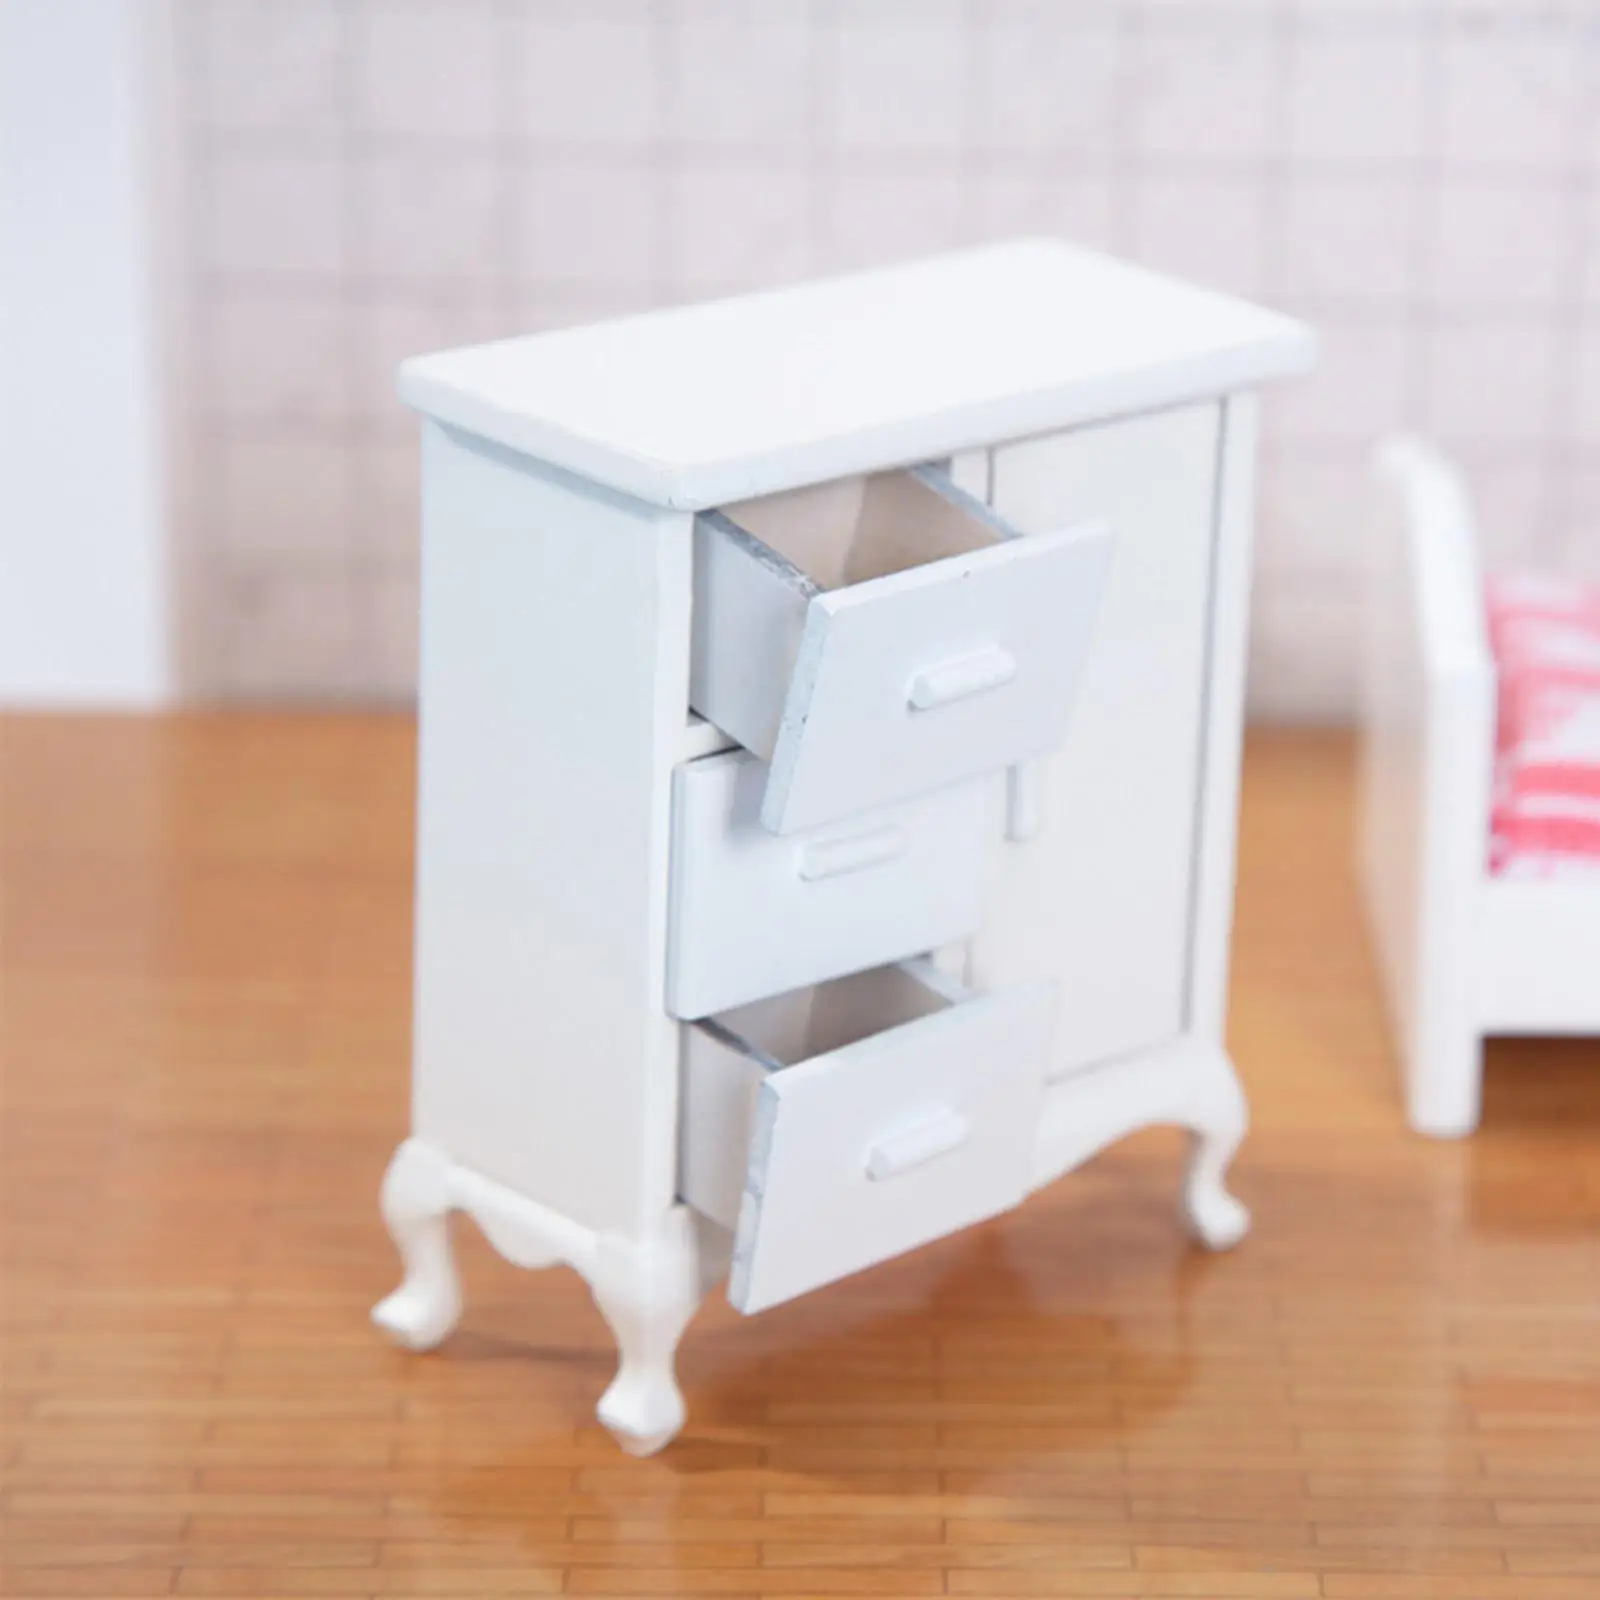 Miniature Wooden Dollhouse Cabinet Photography Props Mini Cabinet for Micro Landscape DIY Model Window Display Life Scene Layout